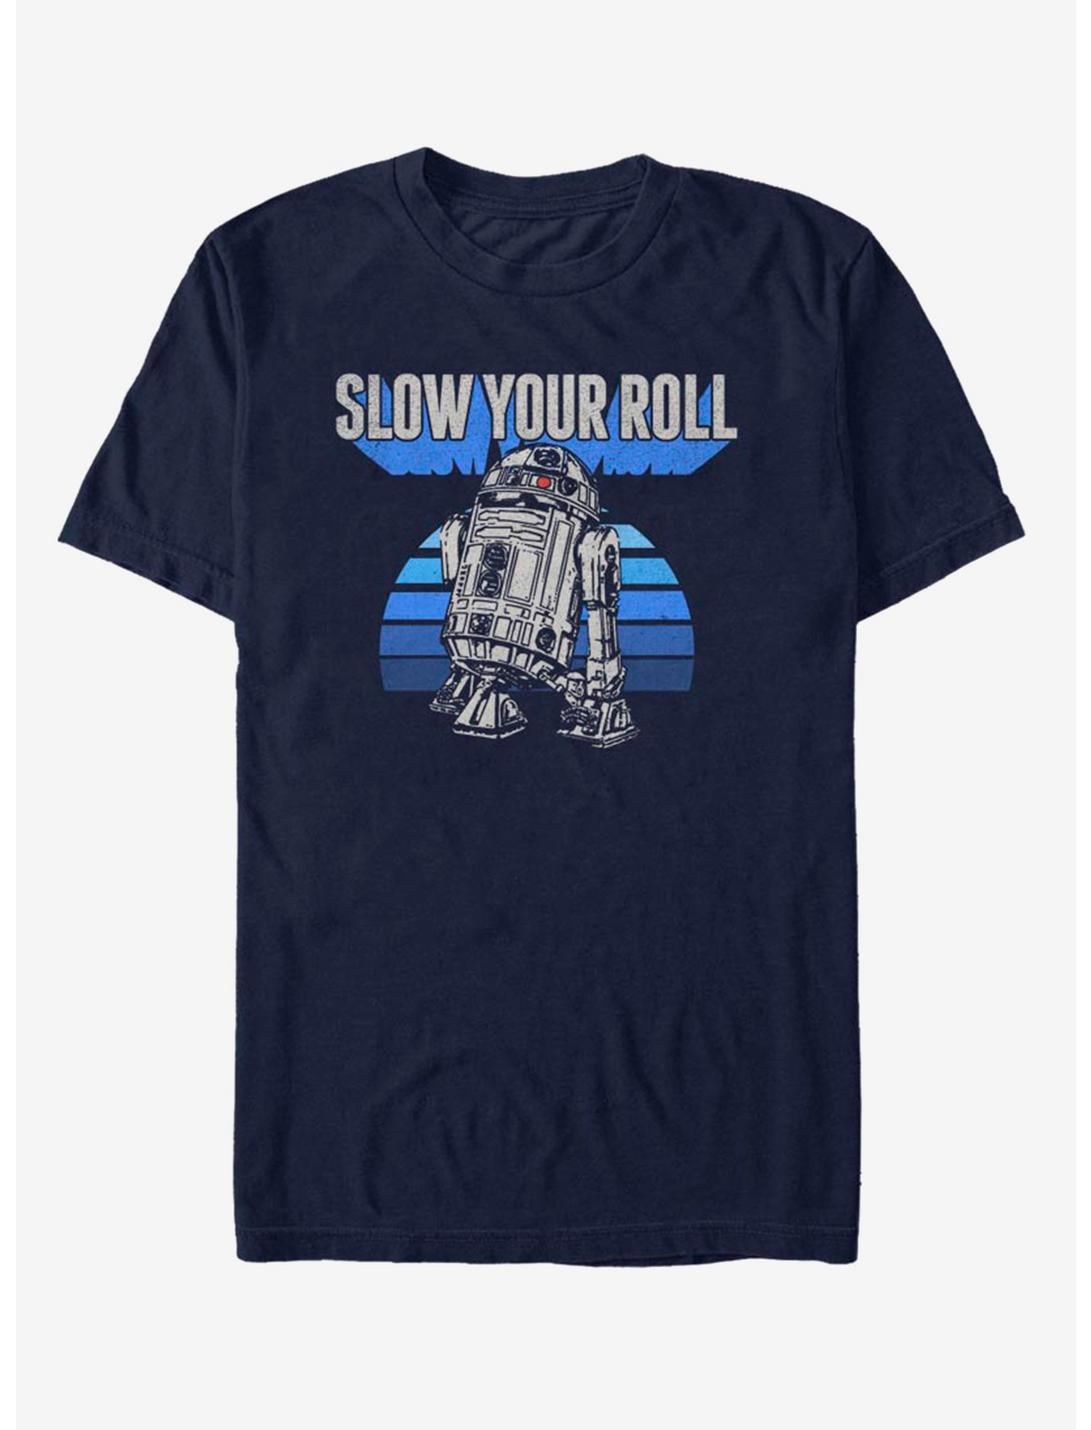 Star Wars Slow Your Roll T-Shirt, NAVY, hi-res